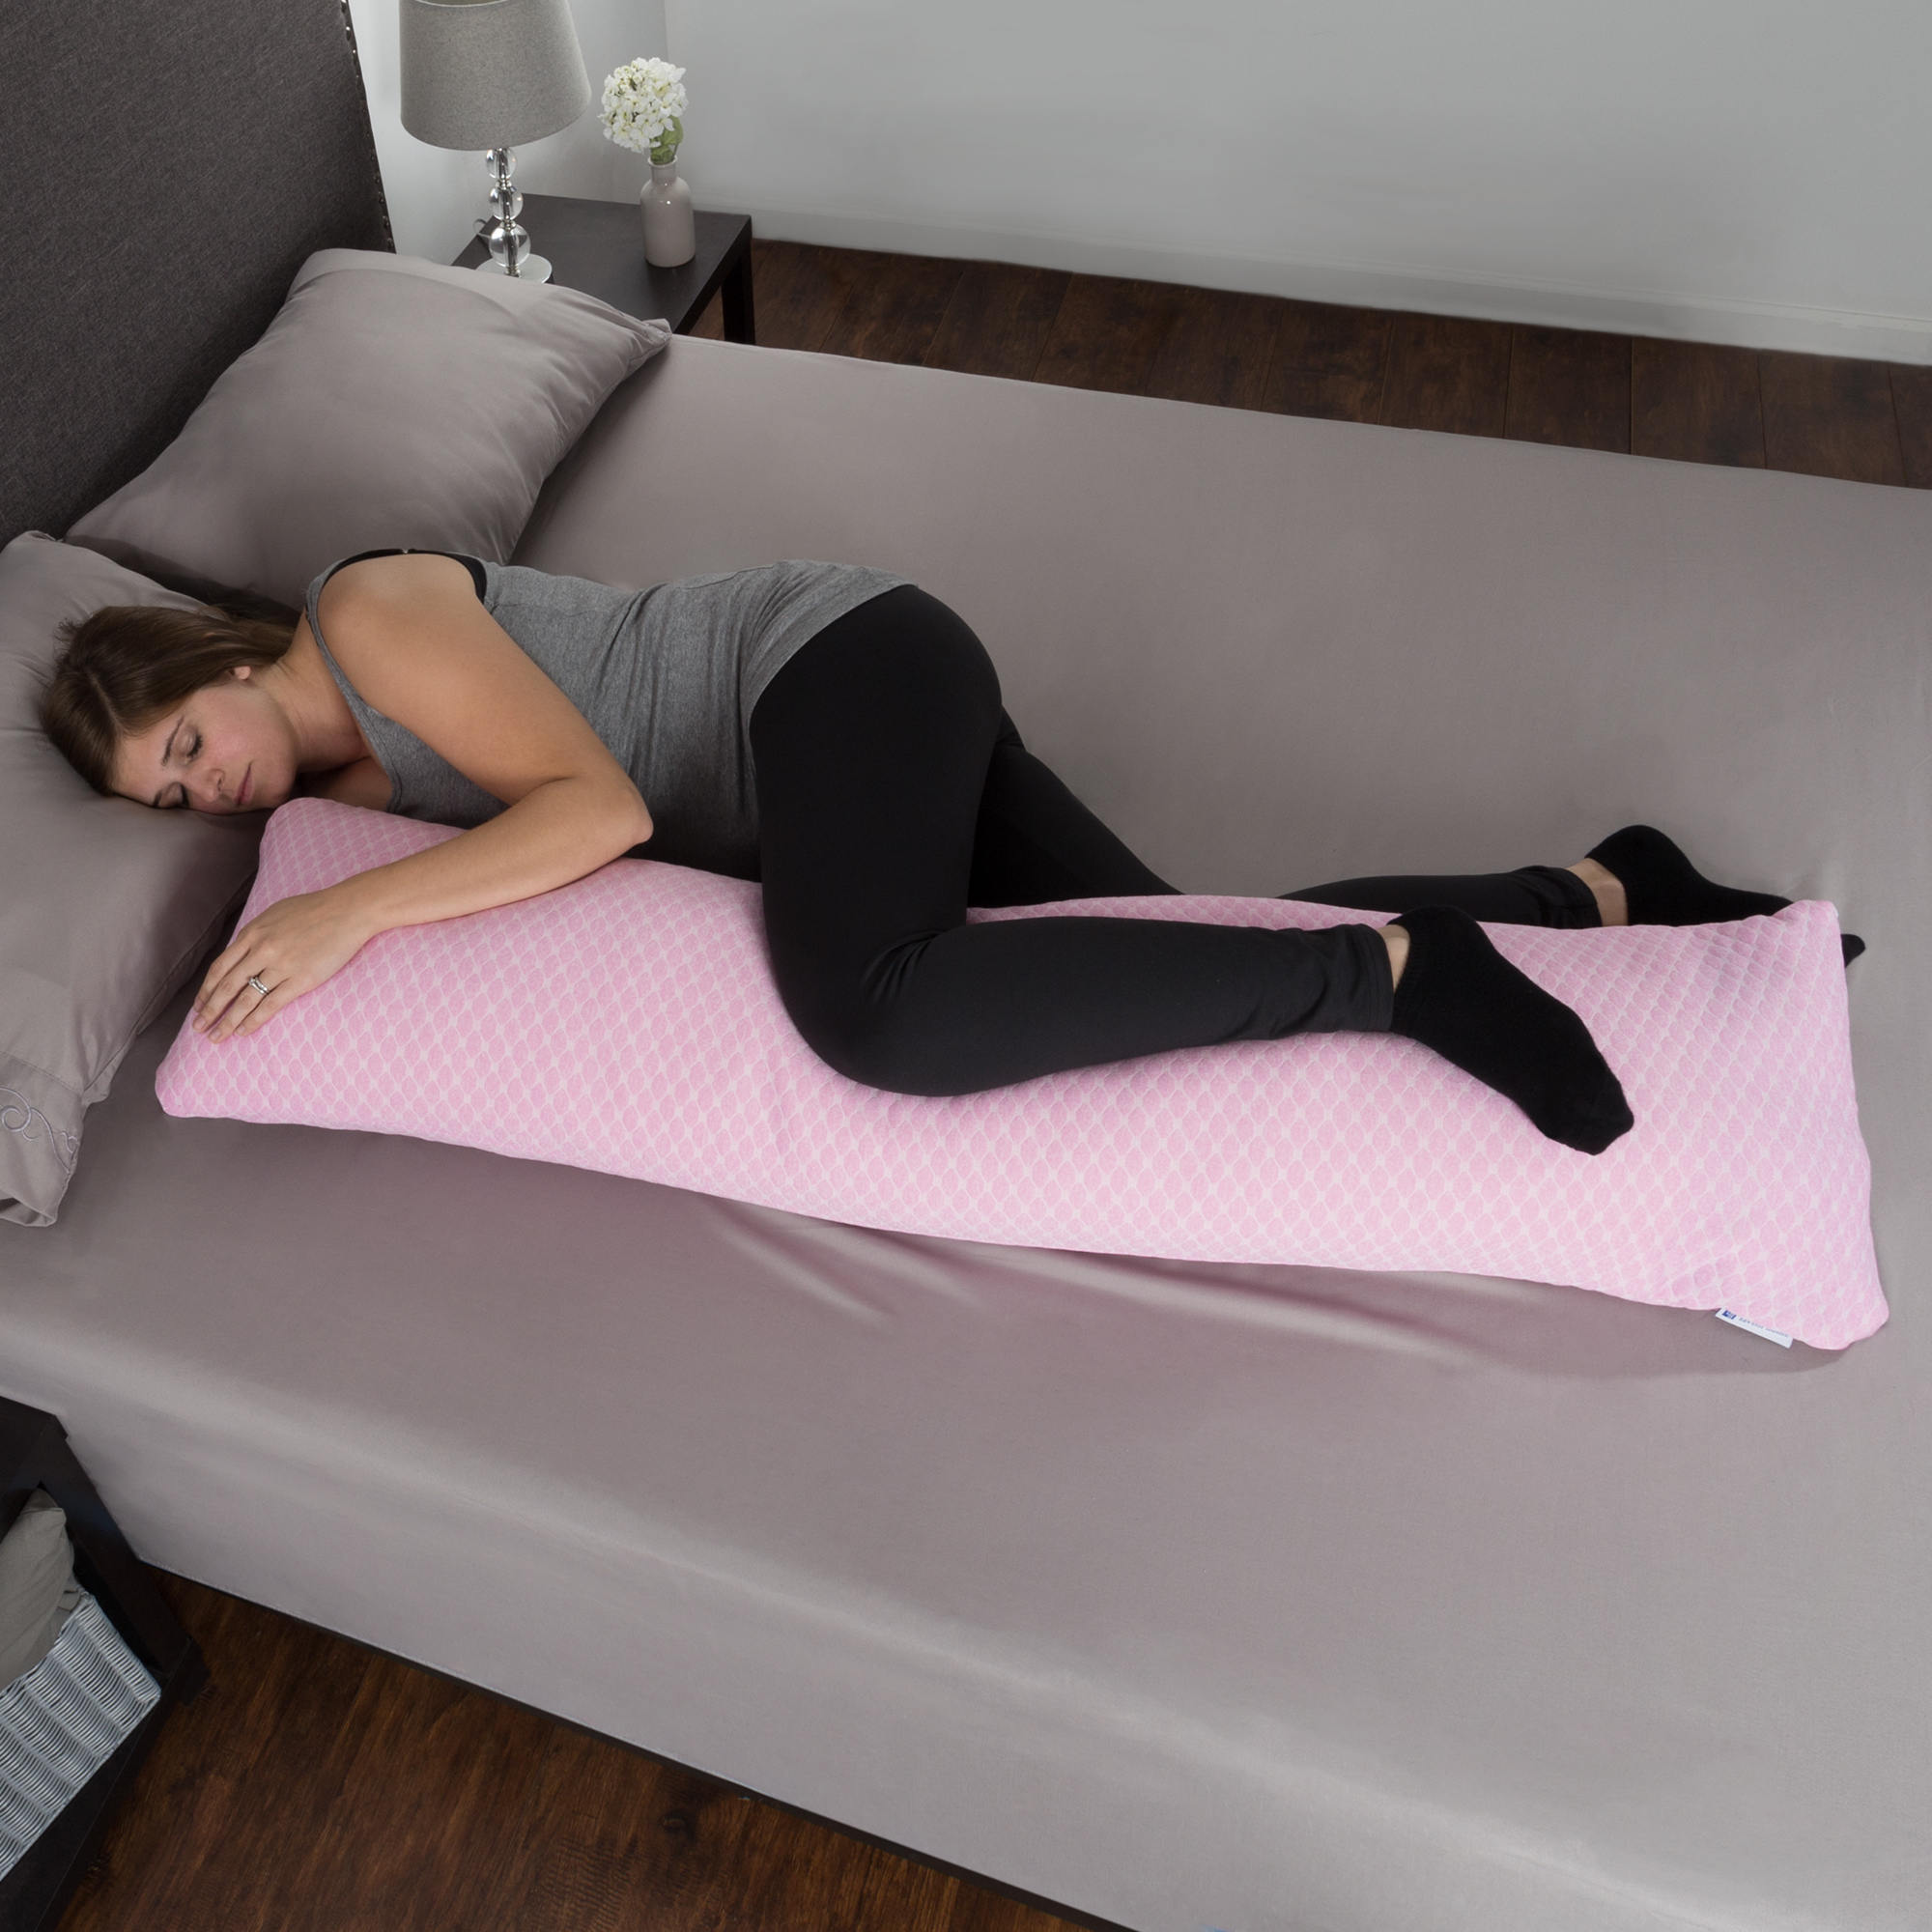 Pink Memory Foam Body Pillow Side Sleepers Aching Legs Knees Zippered Cover